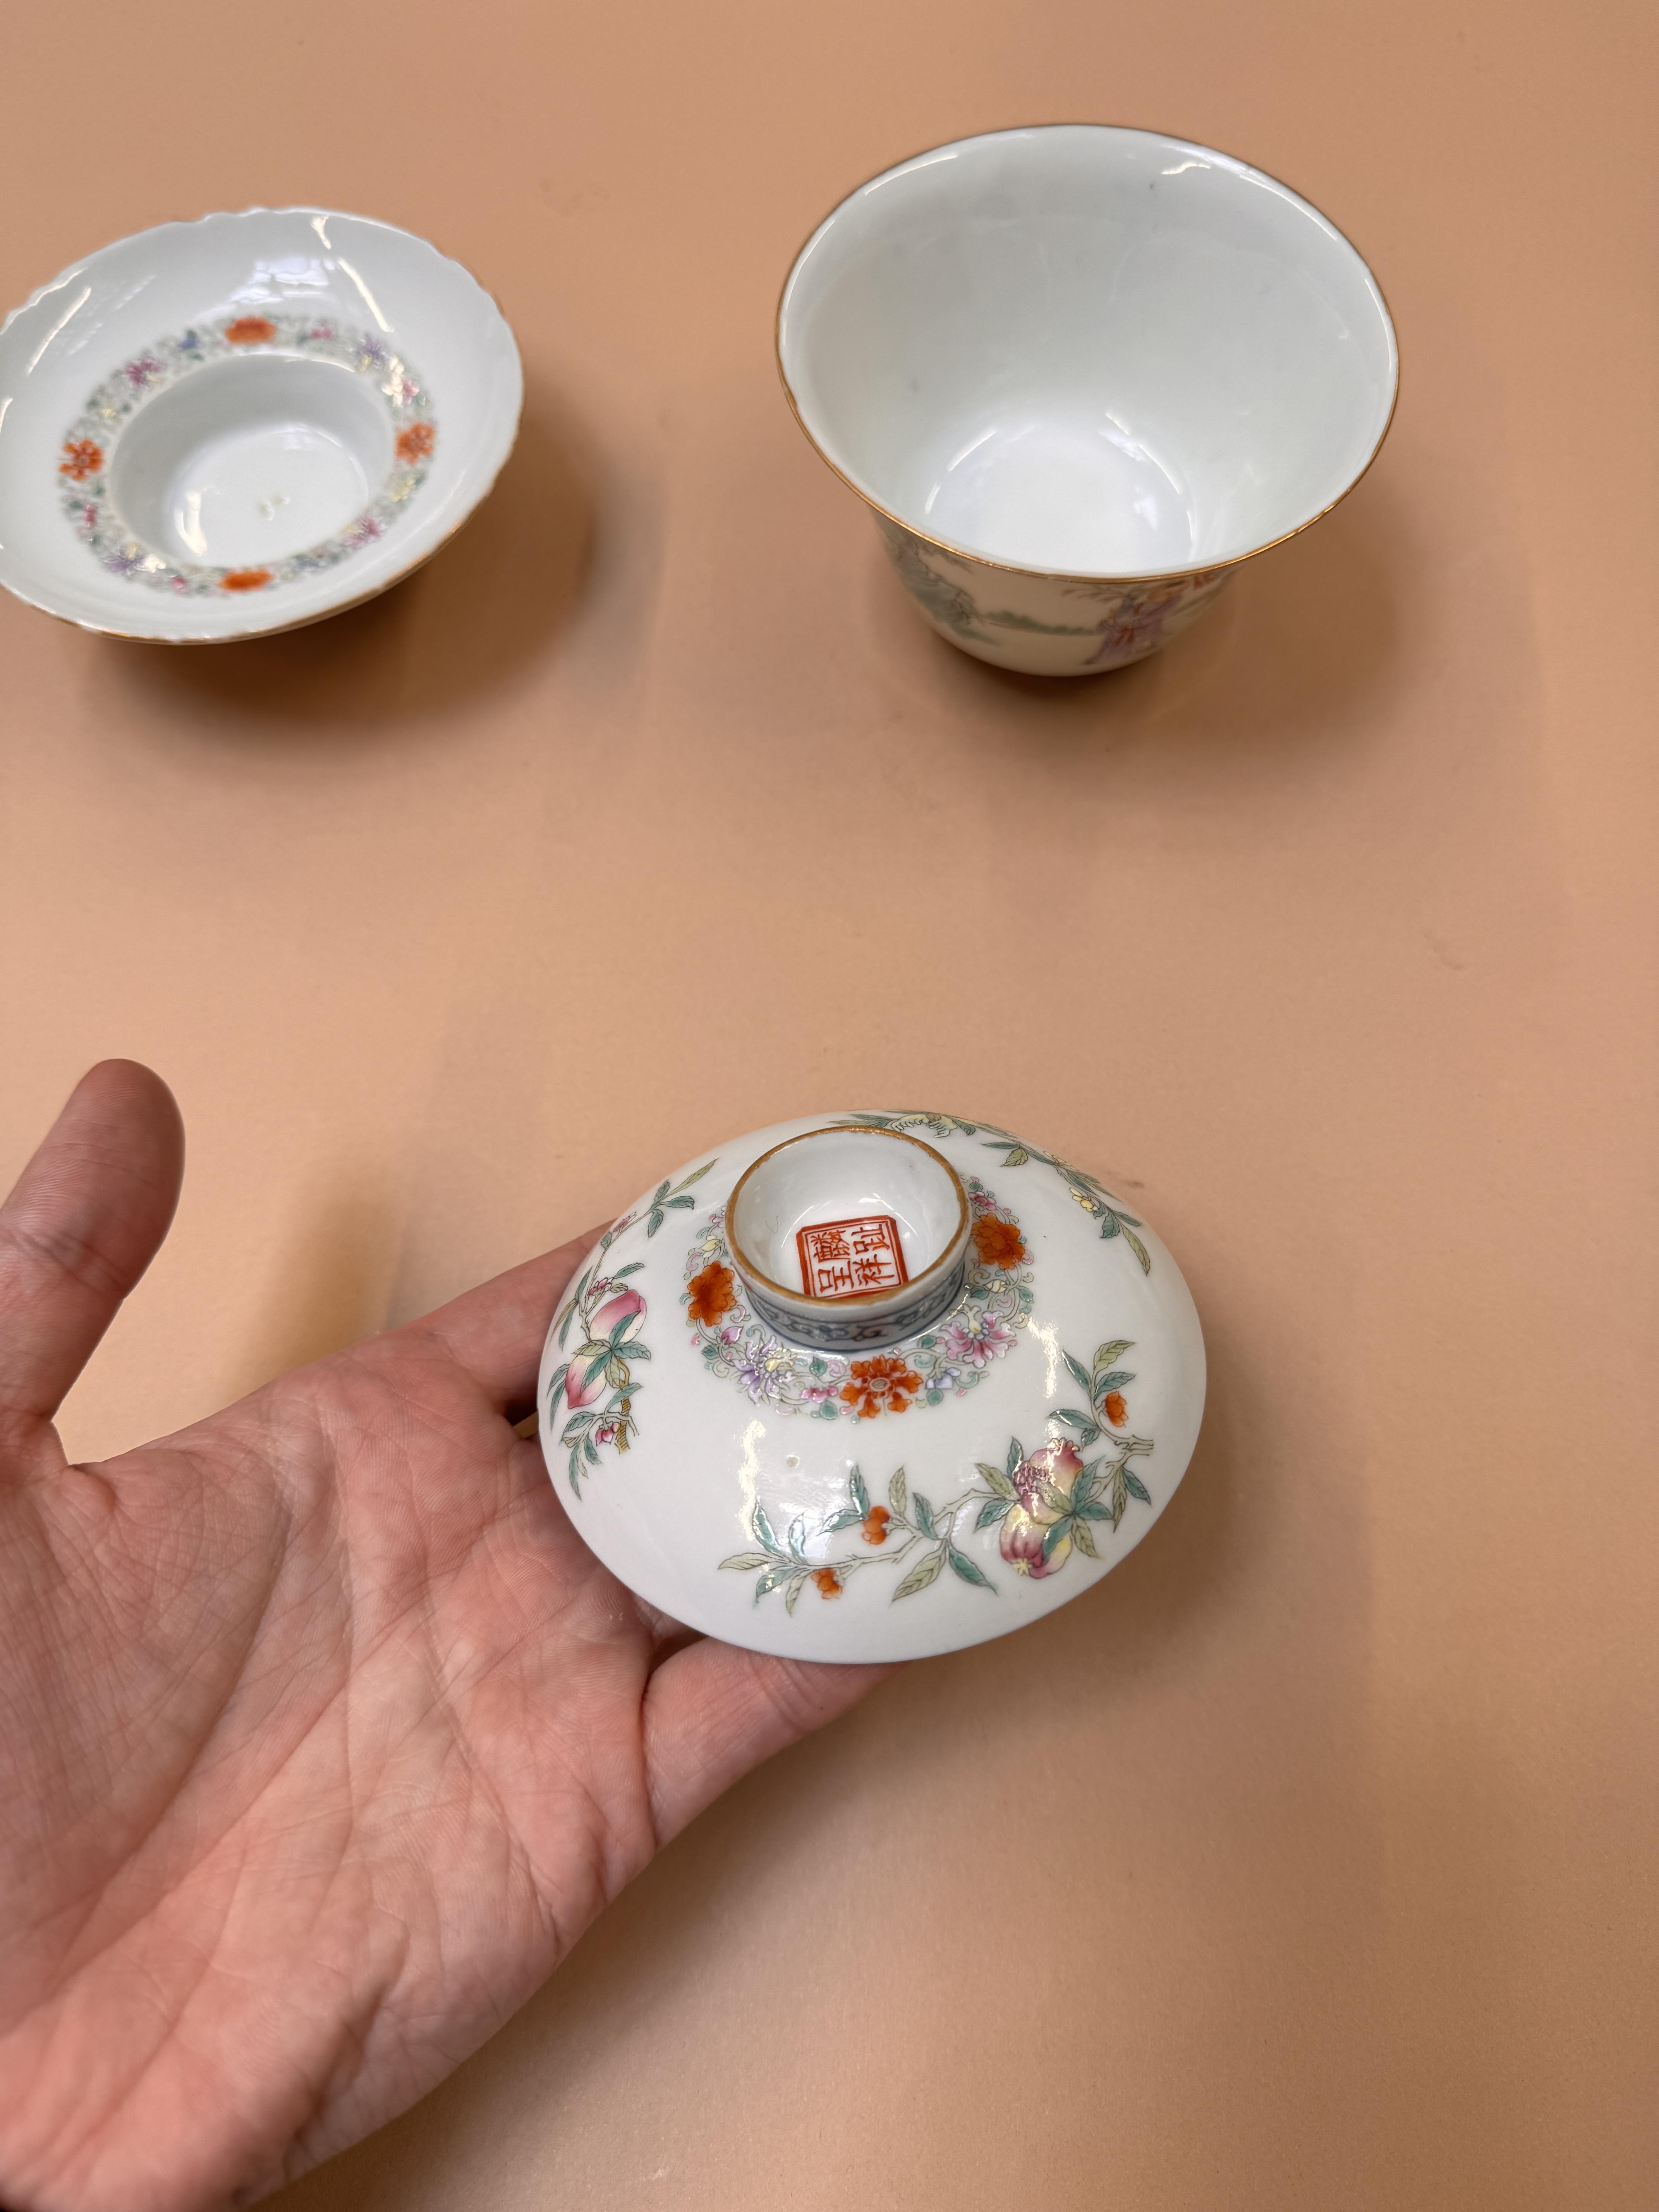 A PAIR OF CHINESE FAMILLE-ROSE CUPS, COVERS AND STANDS 民國時期 粉彩嬰戲圖蓋盌一對 《麟指呈祥》款 - Image 33 of 44